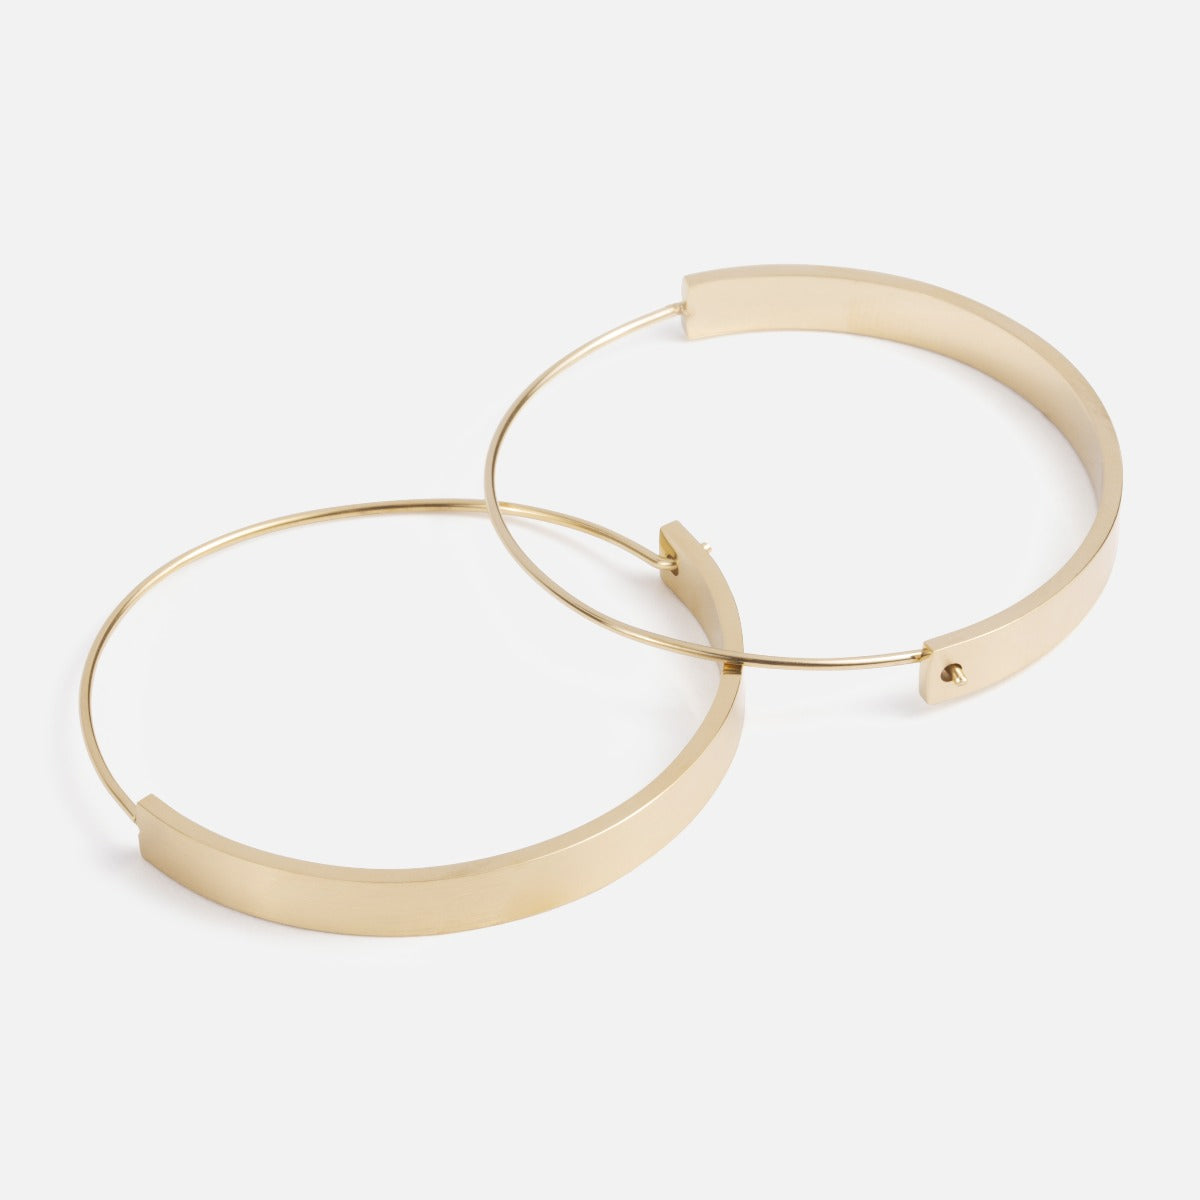 Golden stainless steel earrings with wide side (45 mm)